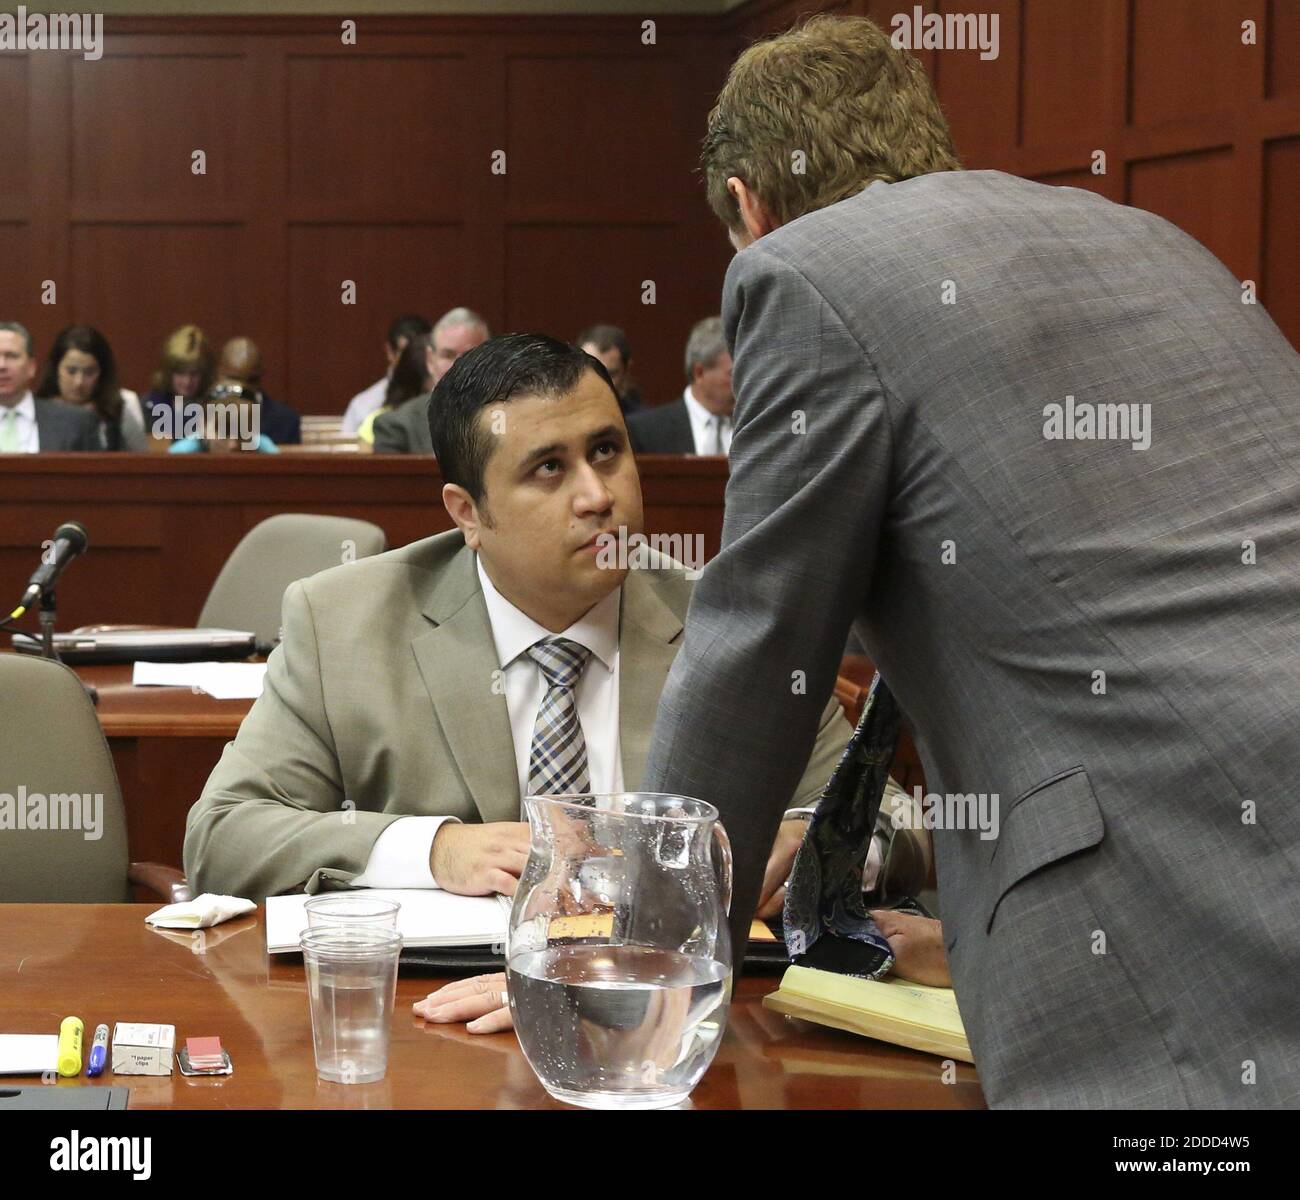 NO FILM, NO VIDEO, NO TV, NO DOCUMENTARY - George Zimmerman, left, chats with his attorney Mark O'Mara on the 12th day of his trial in Sanford, Florida, USA, on Tuesday, June 25, 2013. Zimmerman is charged in the fatal shooting of Trayvon Martin. Photo by Gary W. Green/Orlando Sentinel/MCT/ABACAPRESS.COM Stock Photo